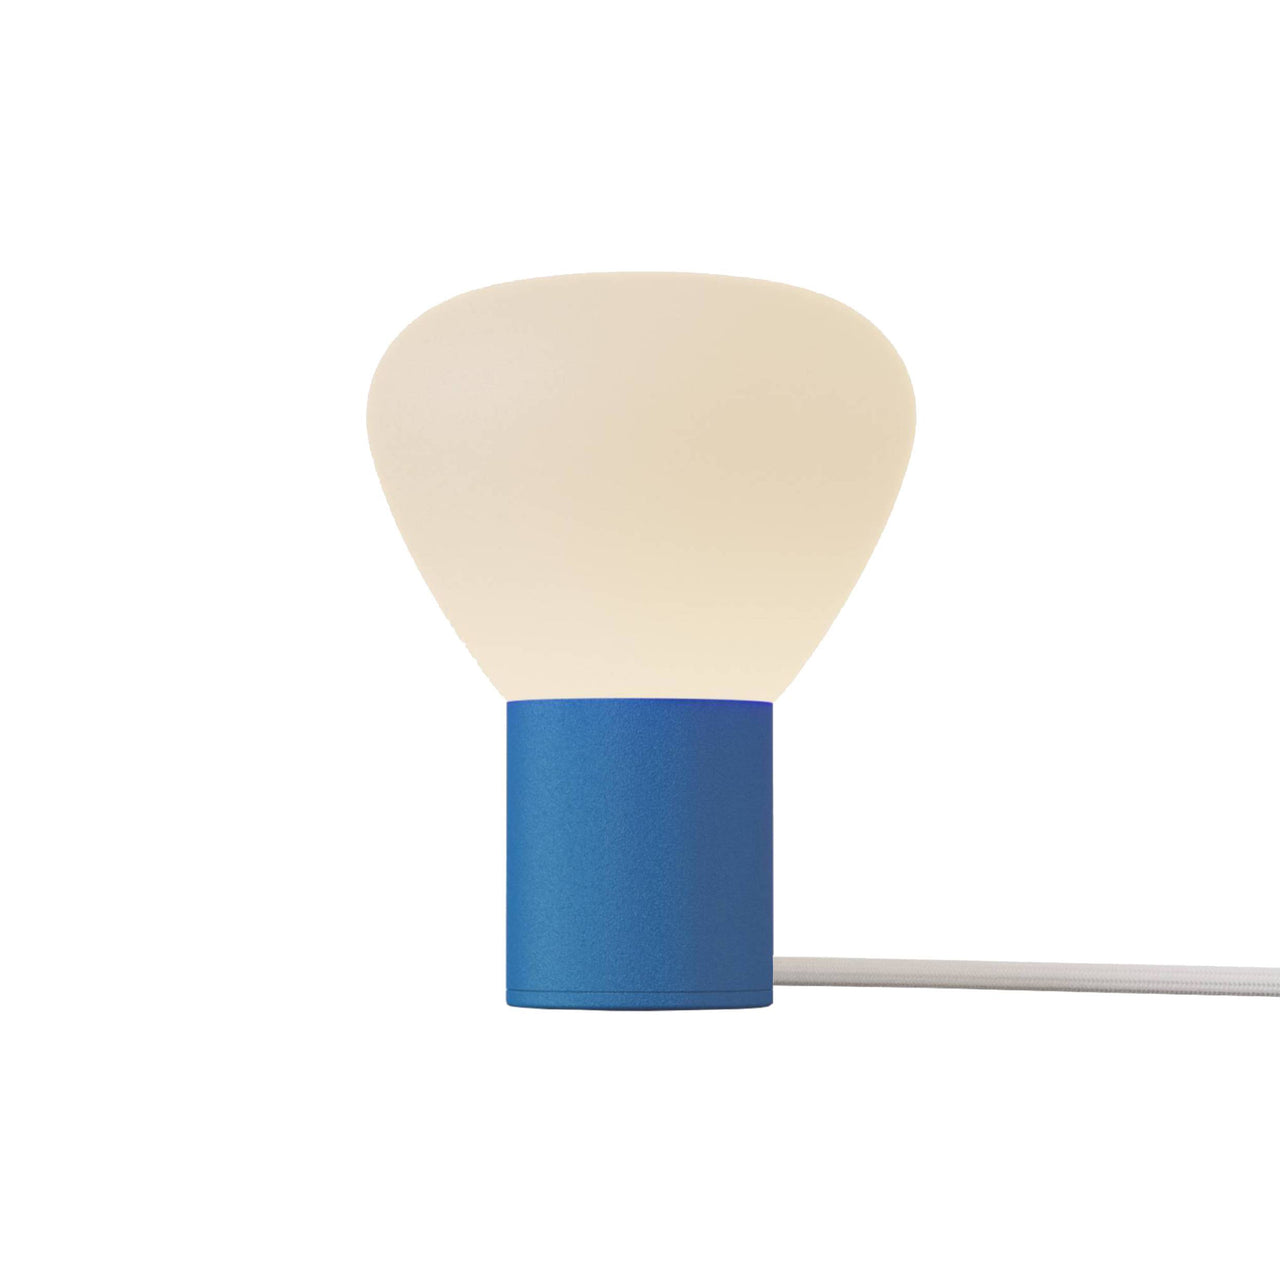 Parc 01 Table Lamp: Handswitch +  Blue + White